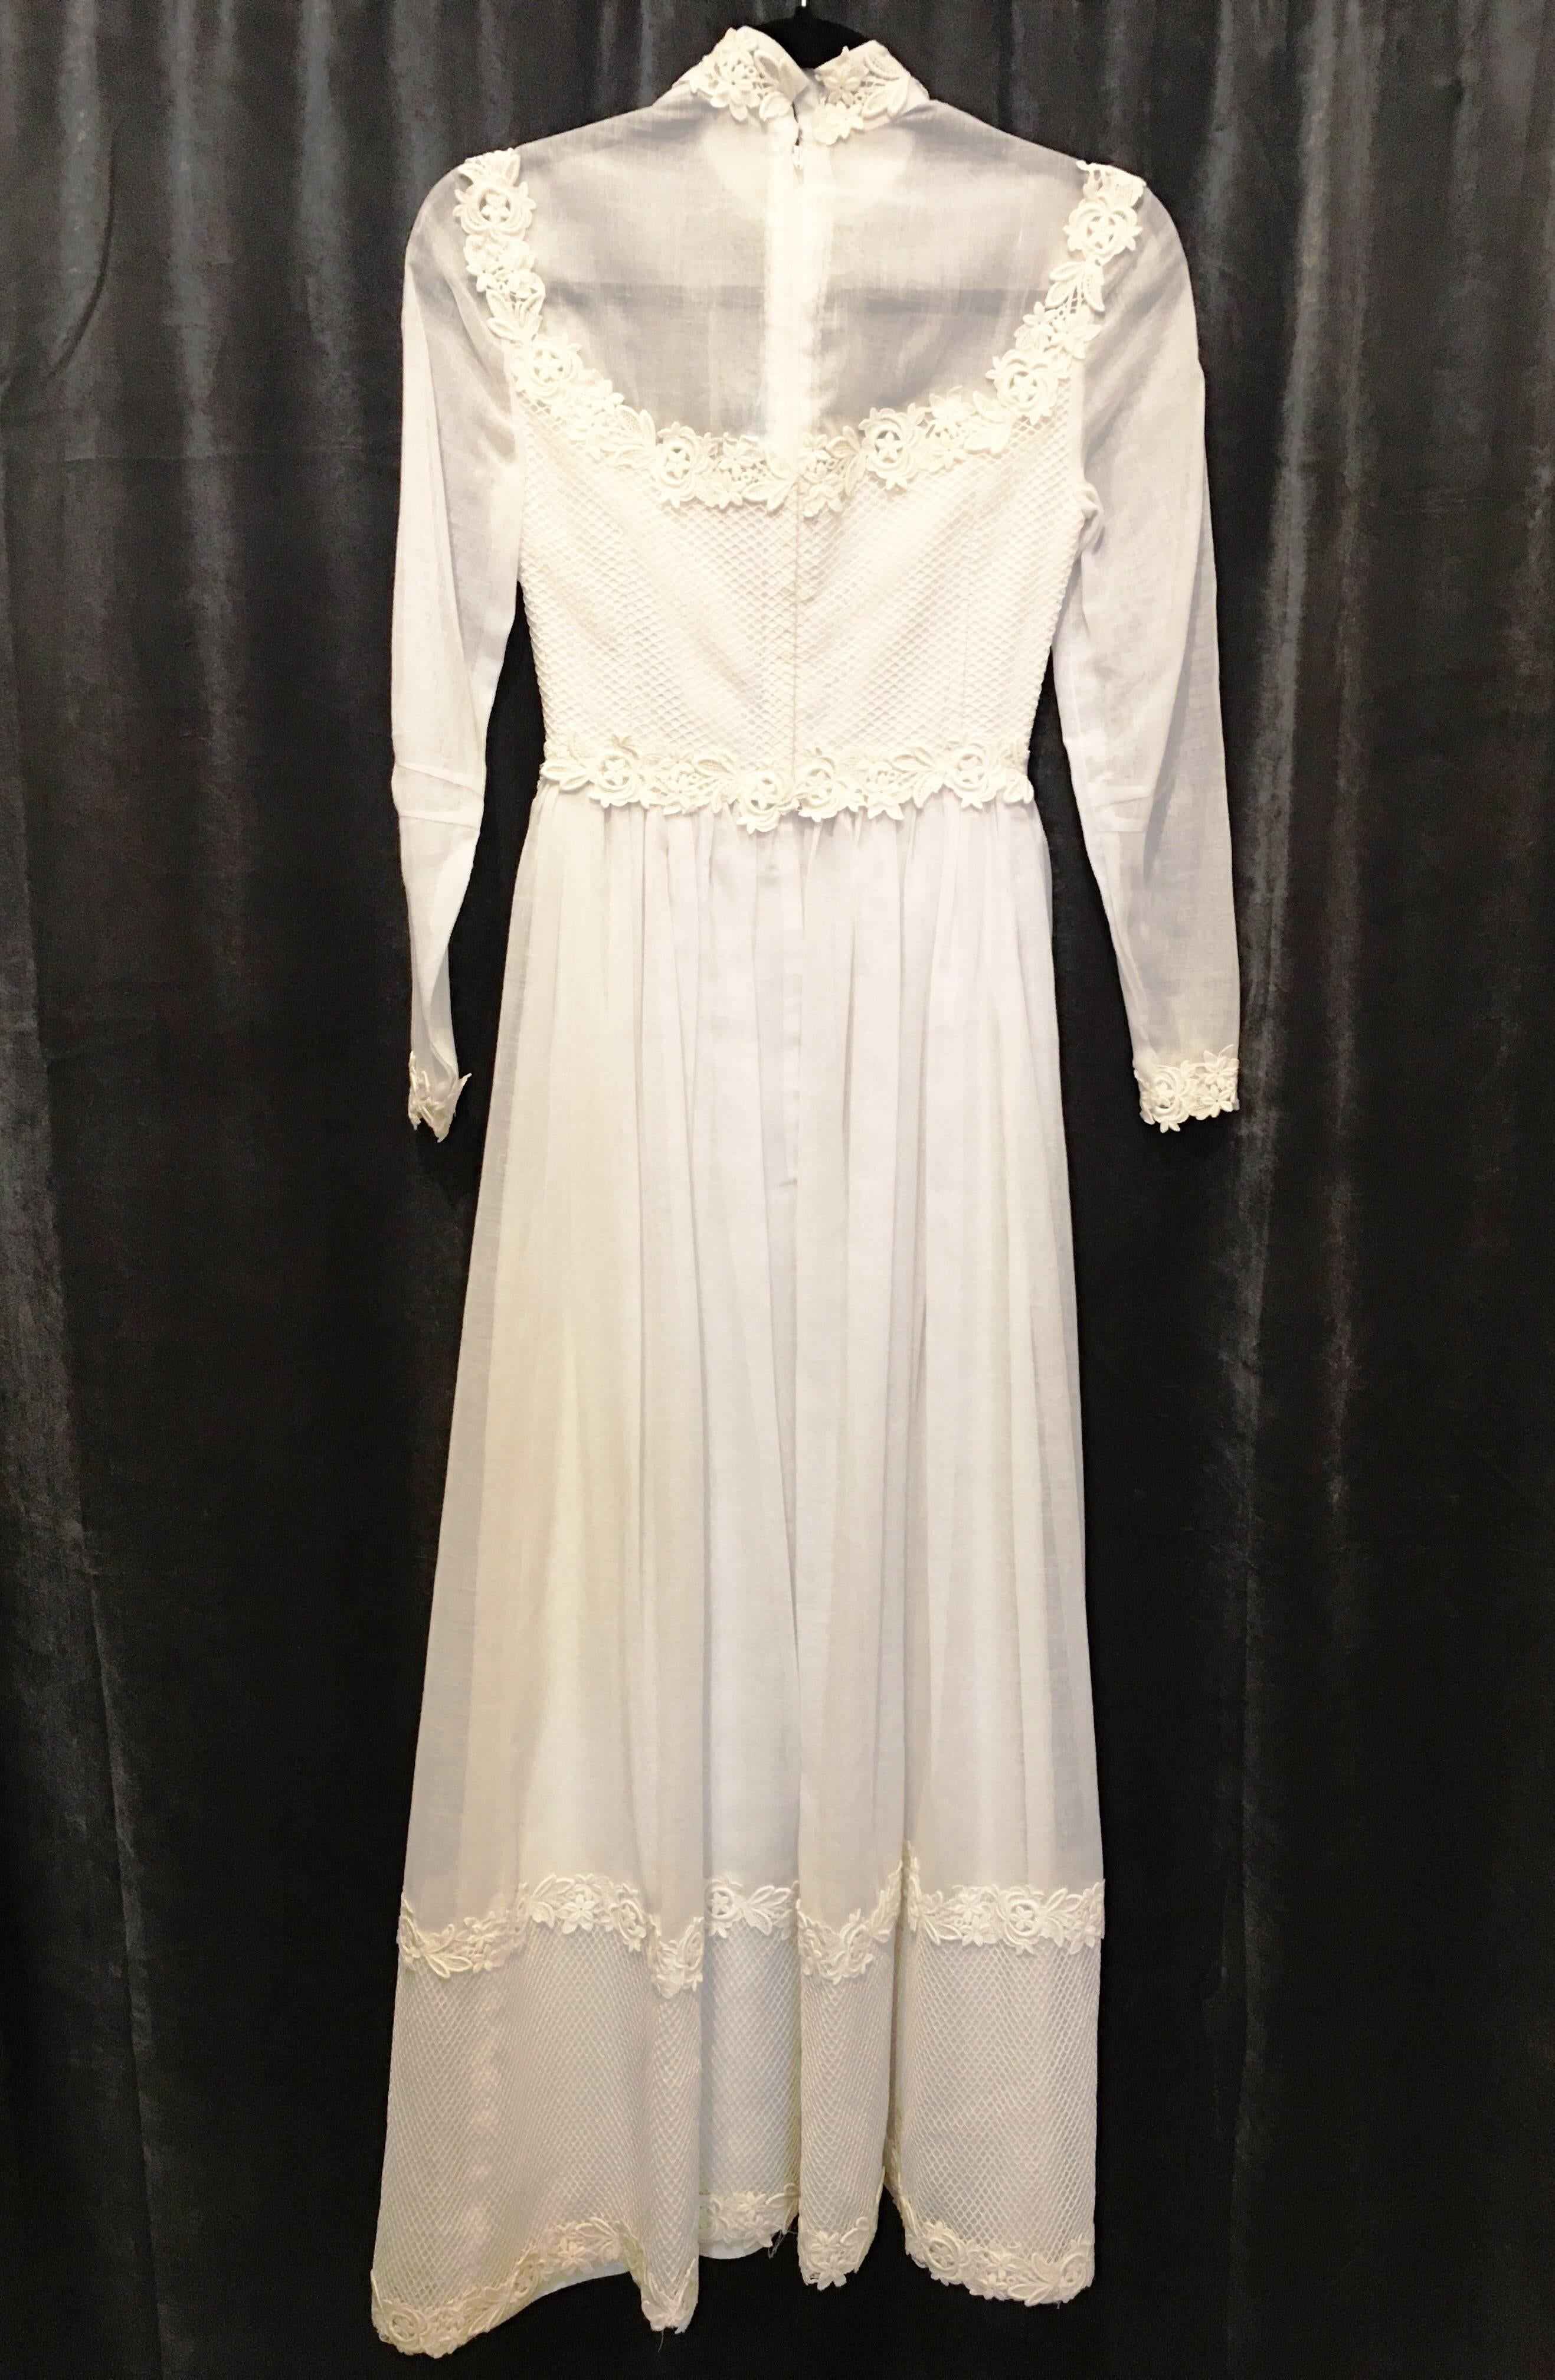 Linen wedding dress with lace trim and netting at hem and bodice. High collar with floral lace and floral lace at cuffs, as well. Bodice is sheer at arms and above bust. Dress zips halfway up the back and has two hook and eye closures at back of